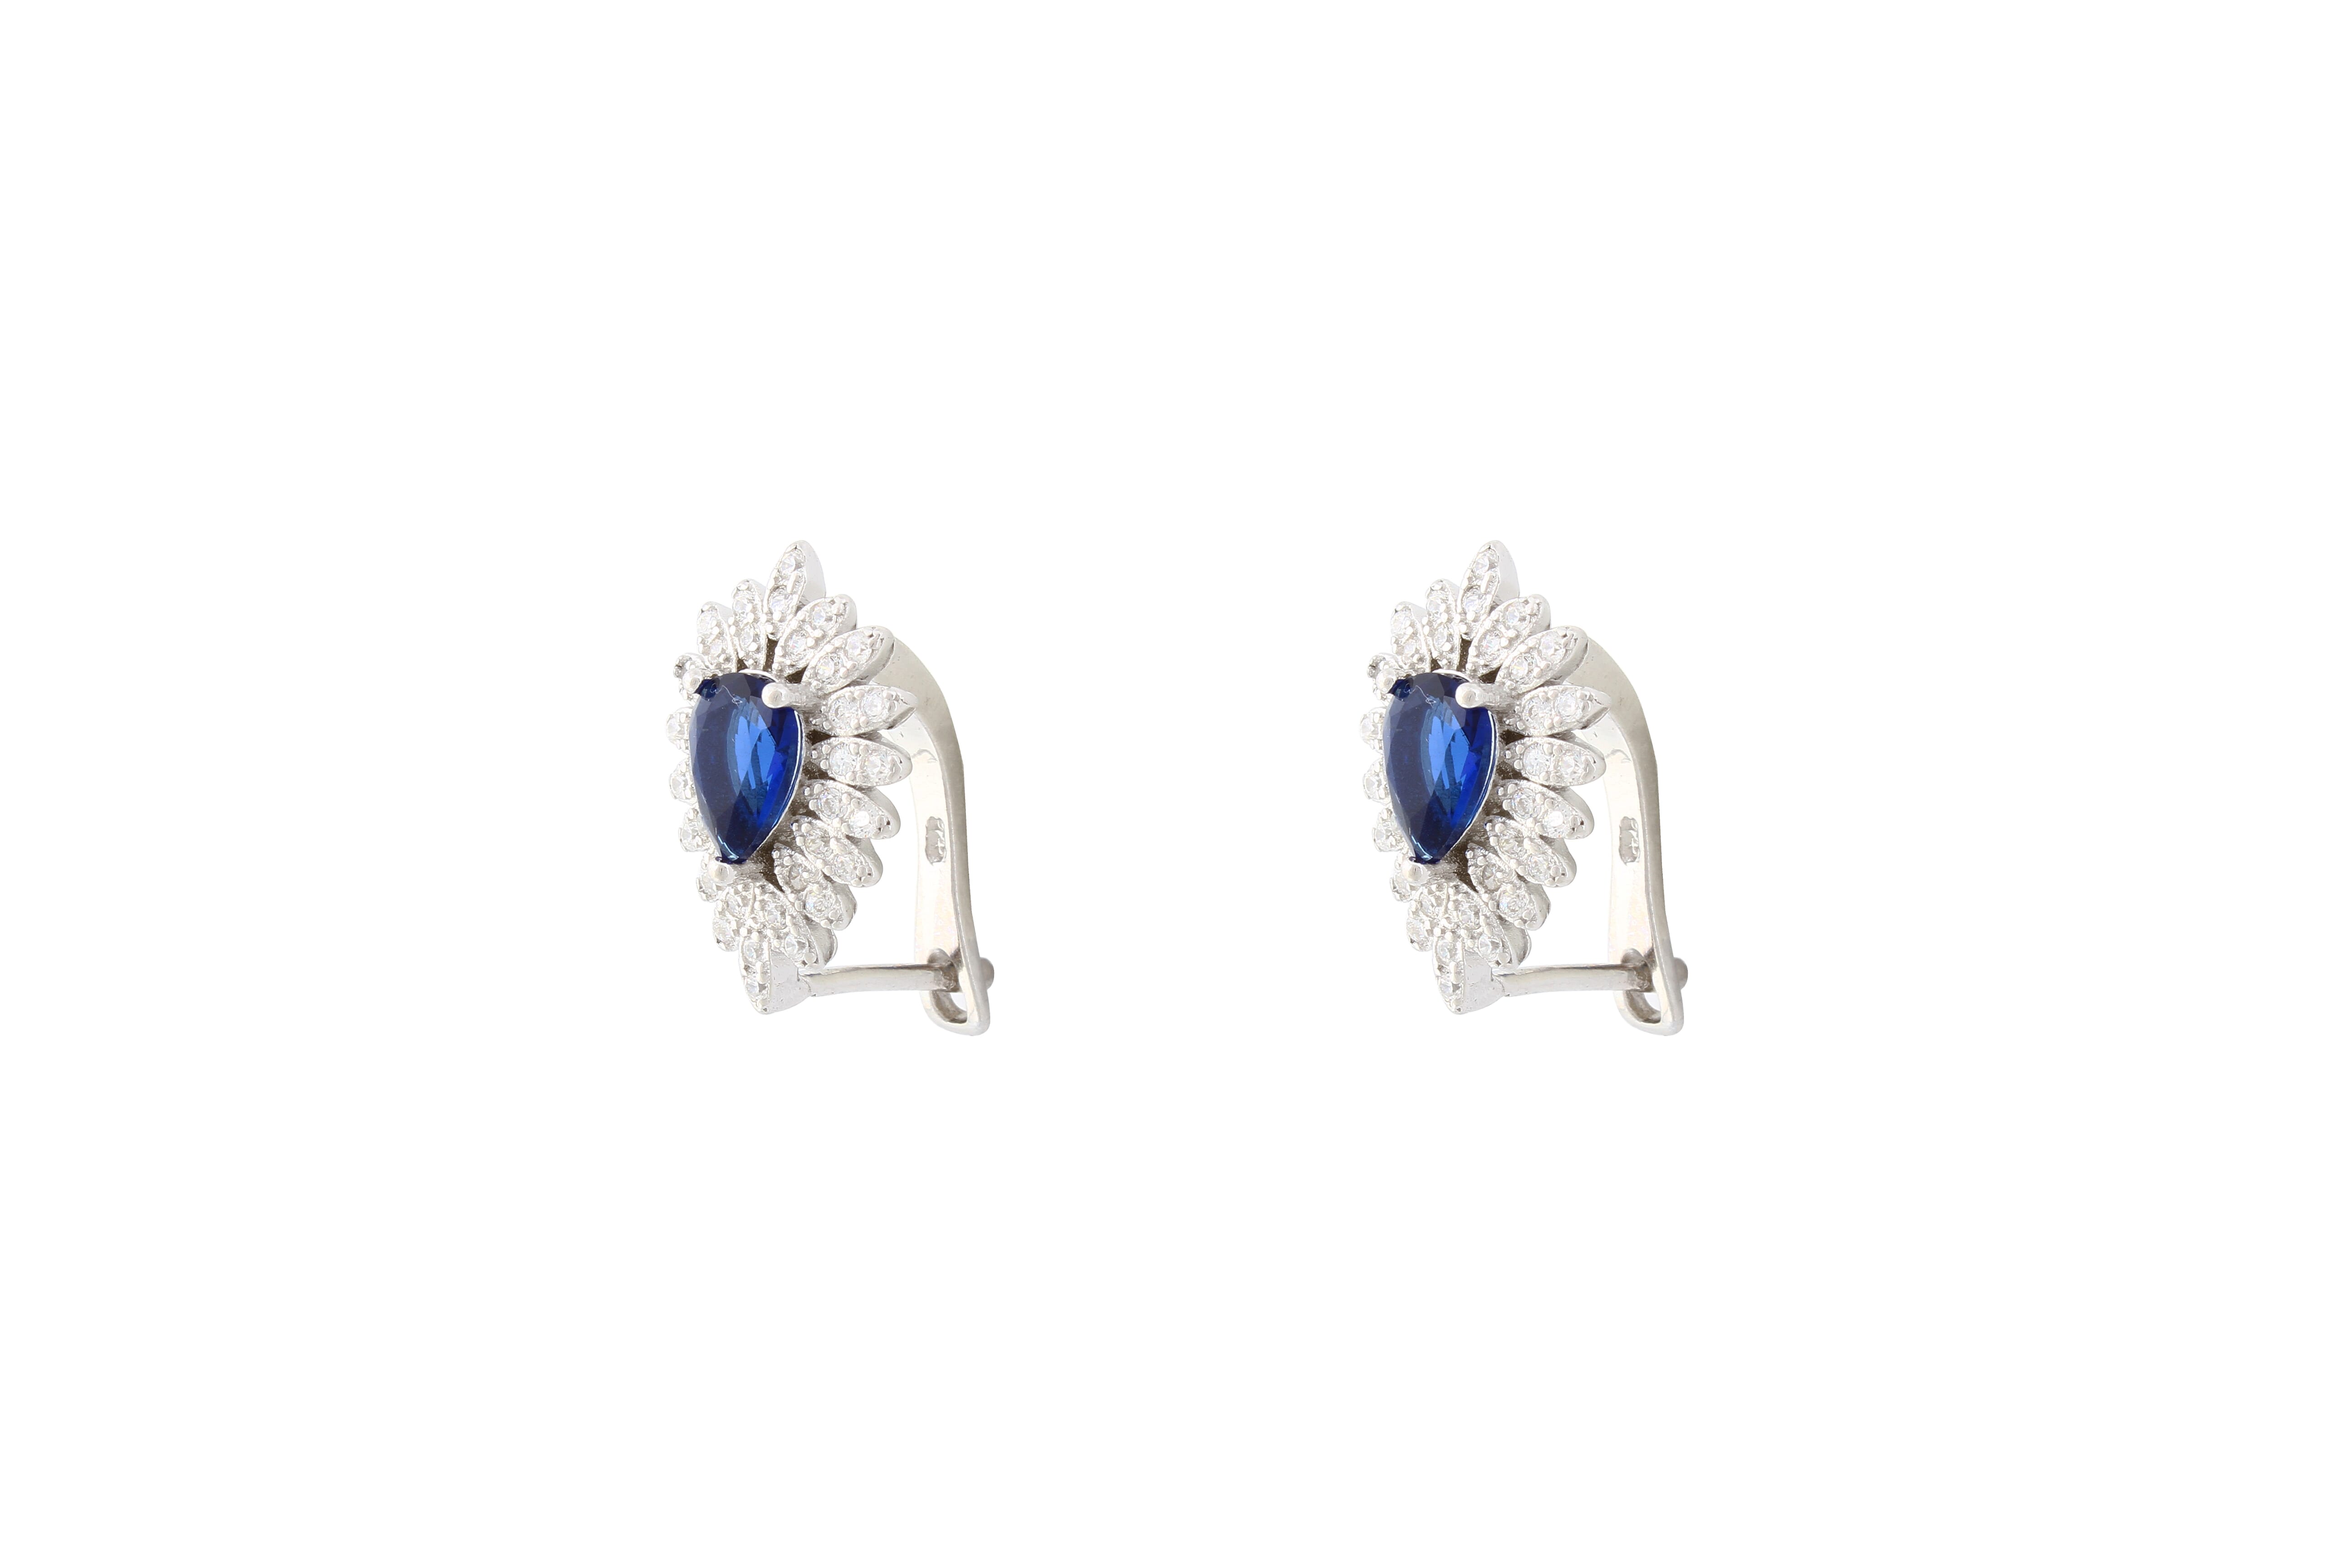 Asfour Clips Earrings With Blue Pear Design